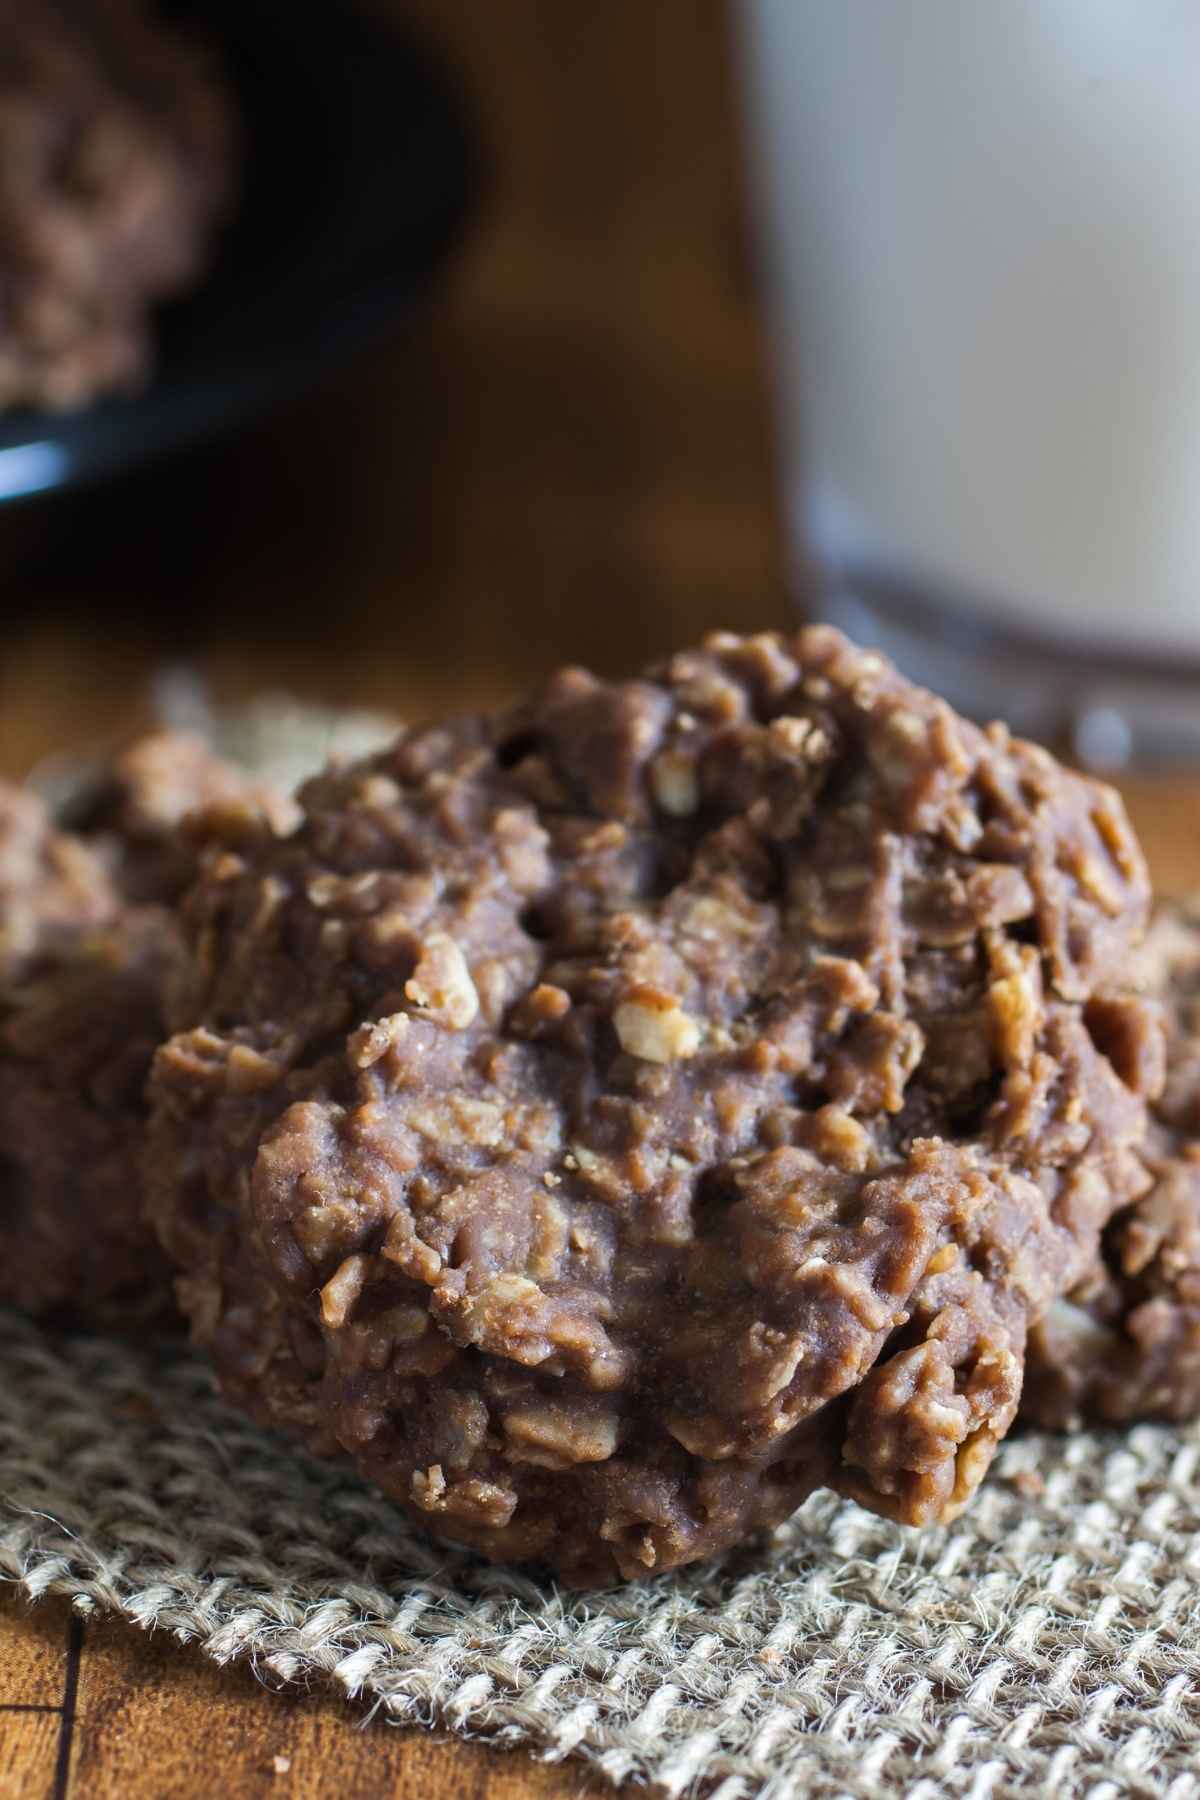 These No Bake Cookies Made without Peanut Butter are delicious and so easy to make. You can make it with or without oatmeal. There are many other variations too! They’re just as tasty as baked cookies.